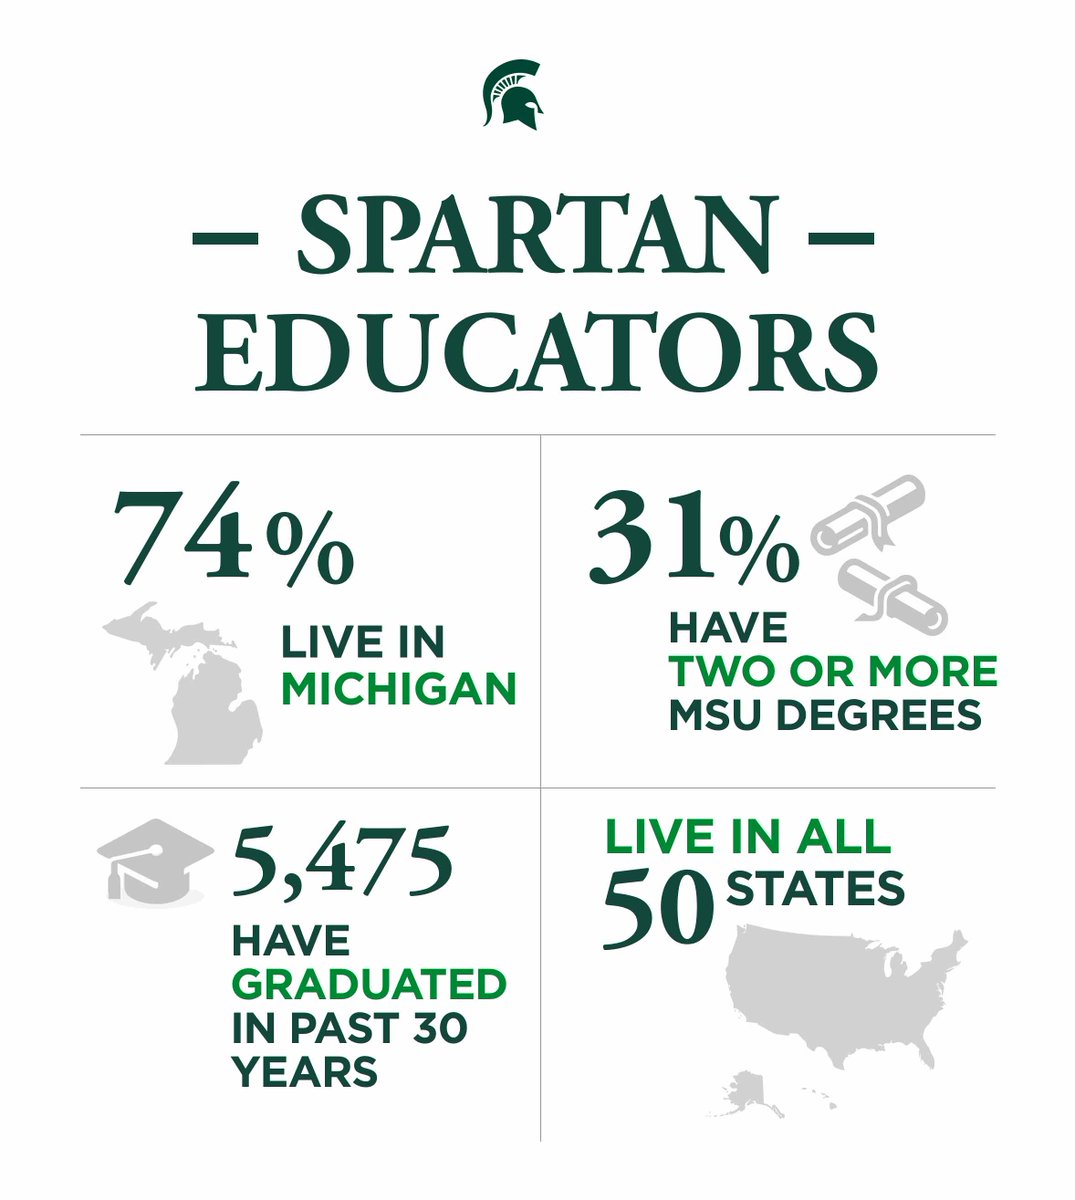 Spartan educators are making a difference through teaching and groundbreaking research. Happy Teacher Appreciation Week!